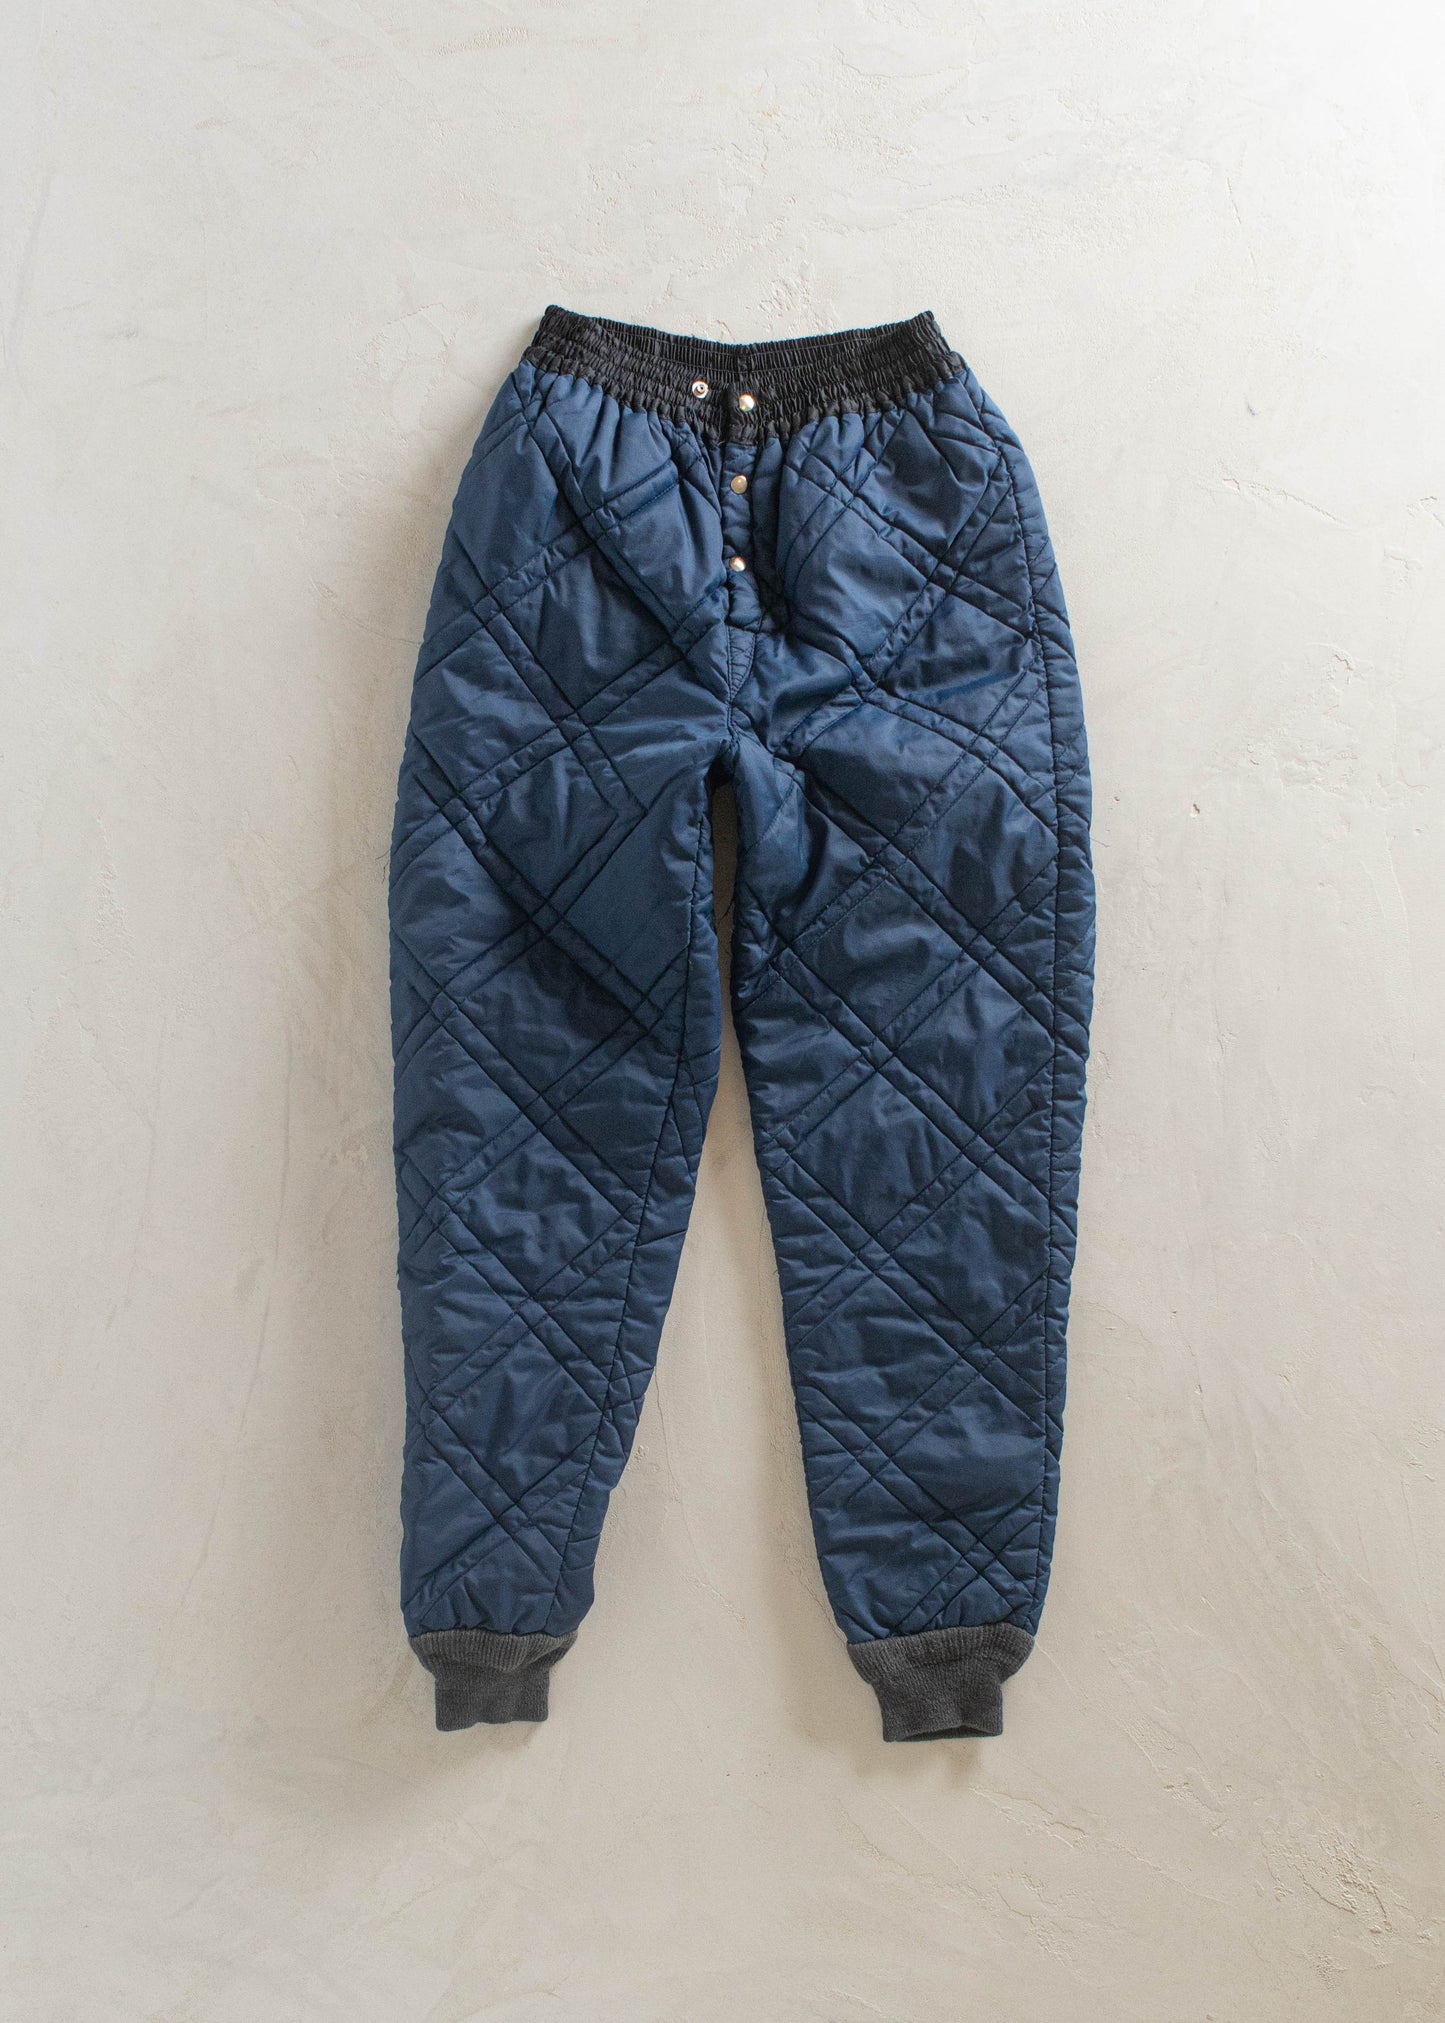 1980s Quilted Liner Pants Size XS/S